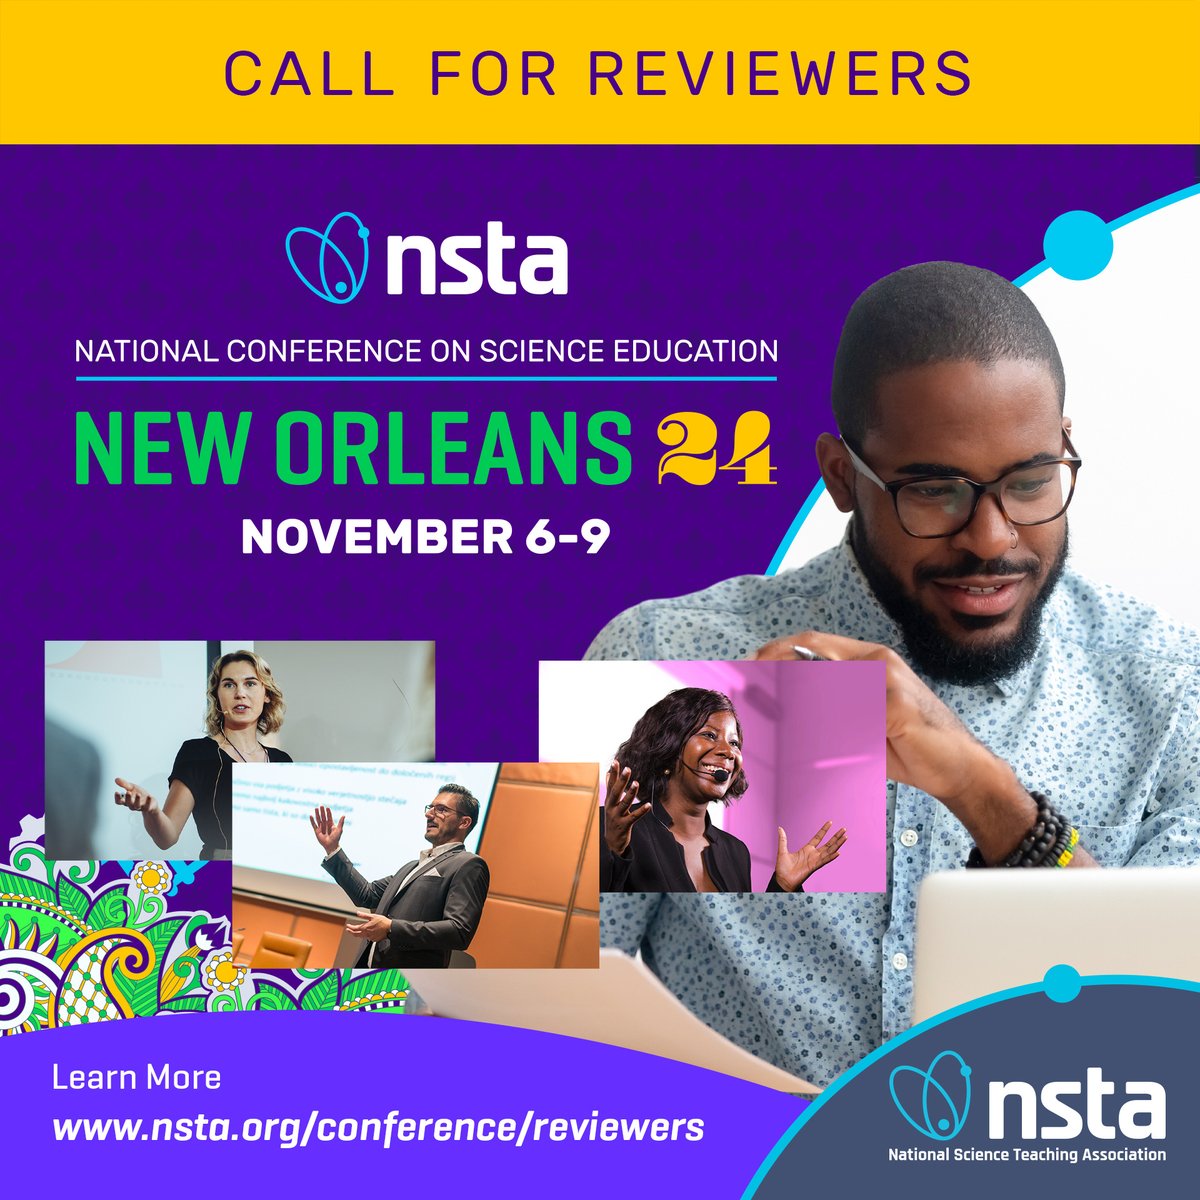 Time is running out to submit a presentation proposal or be a reviewer for #NOLA24. Don’t miss your chance to make a change in #STEM education, apply to review today and gain both a NSTA profile badge and an official certificate for reviewing. Apply at bit.ly/44sWaFH